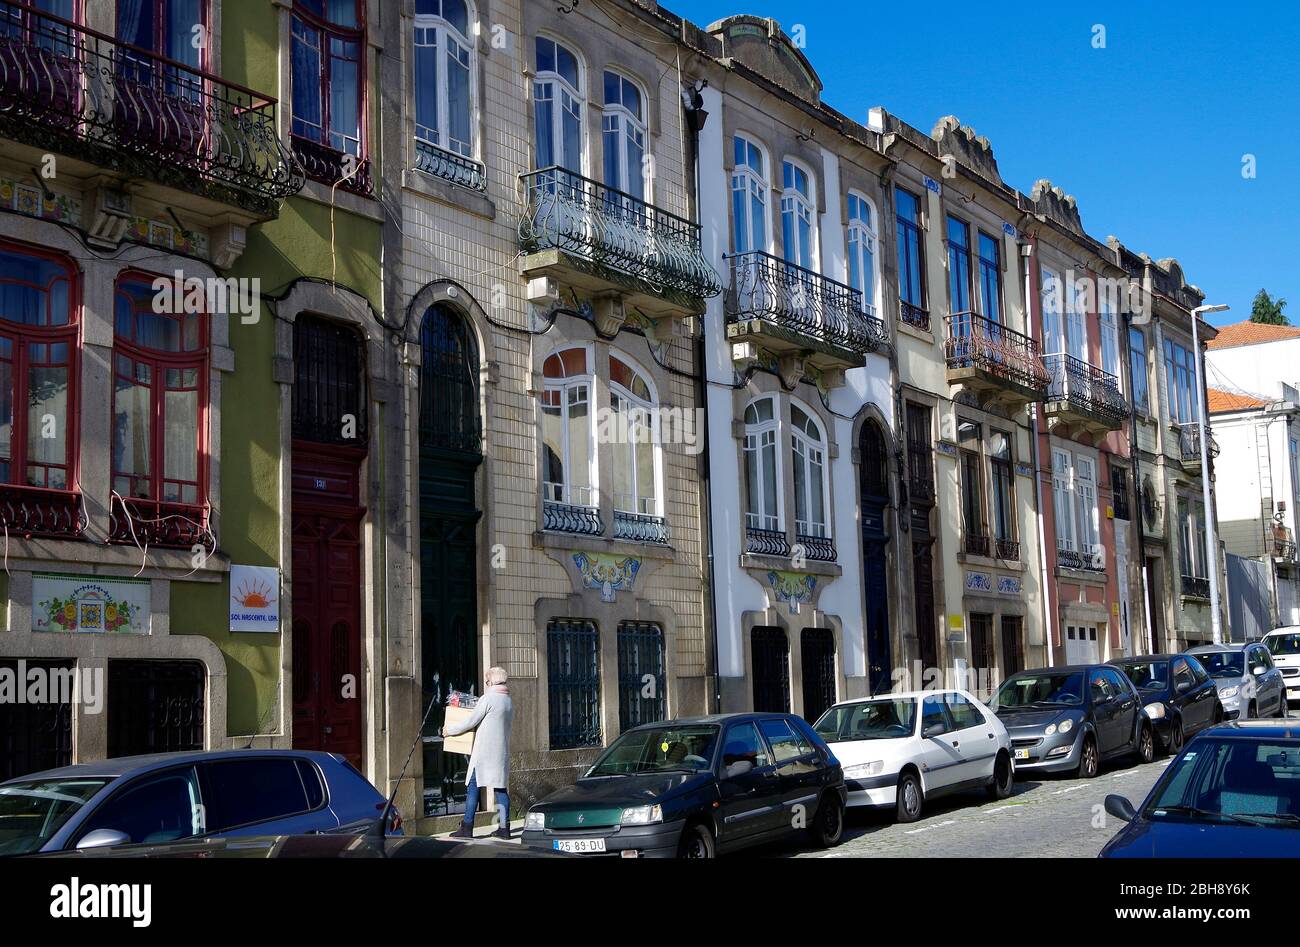 Late 19th/early 20th Century Art Nouveau houses for burgeoning middle classes in Porto, Portugal, curvaceous balconies and window openings & woodwork. Stock Photo